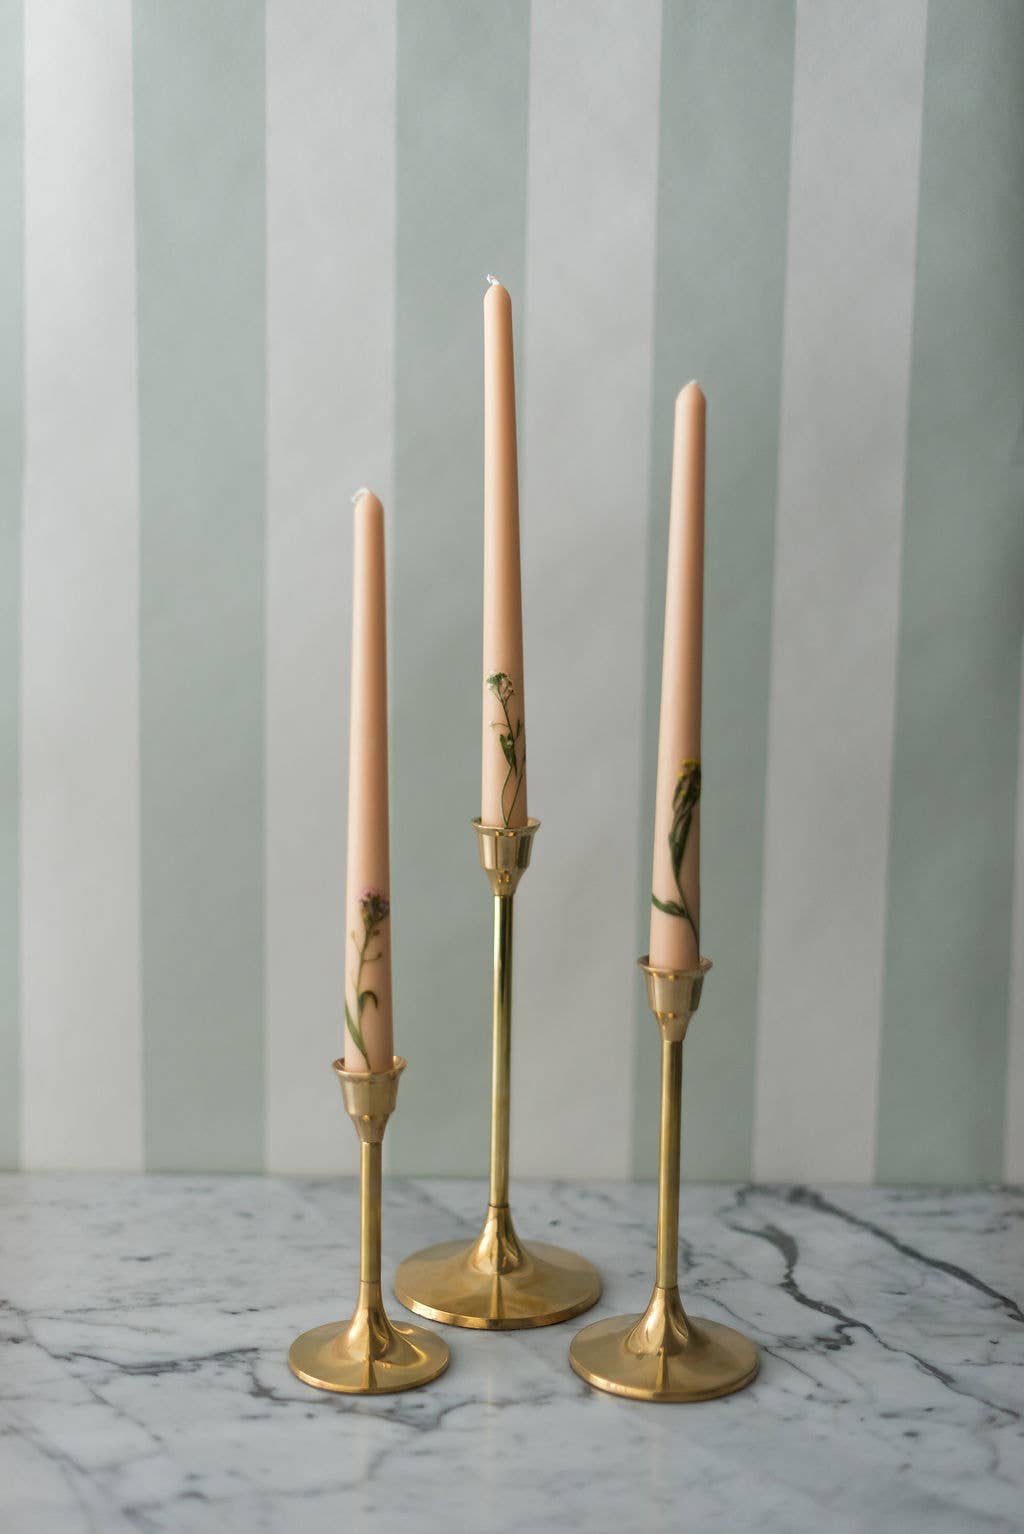 Floral Inlaid Tapered Candles - Set of 3